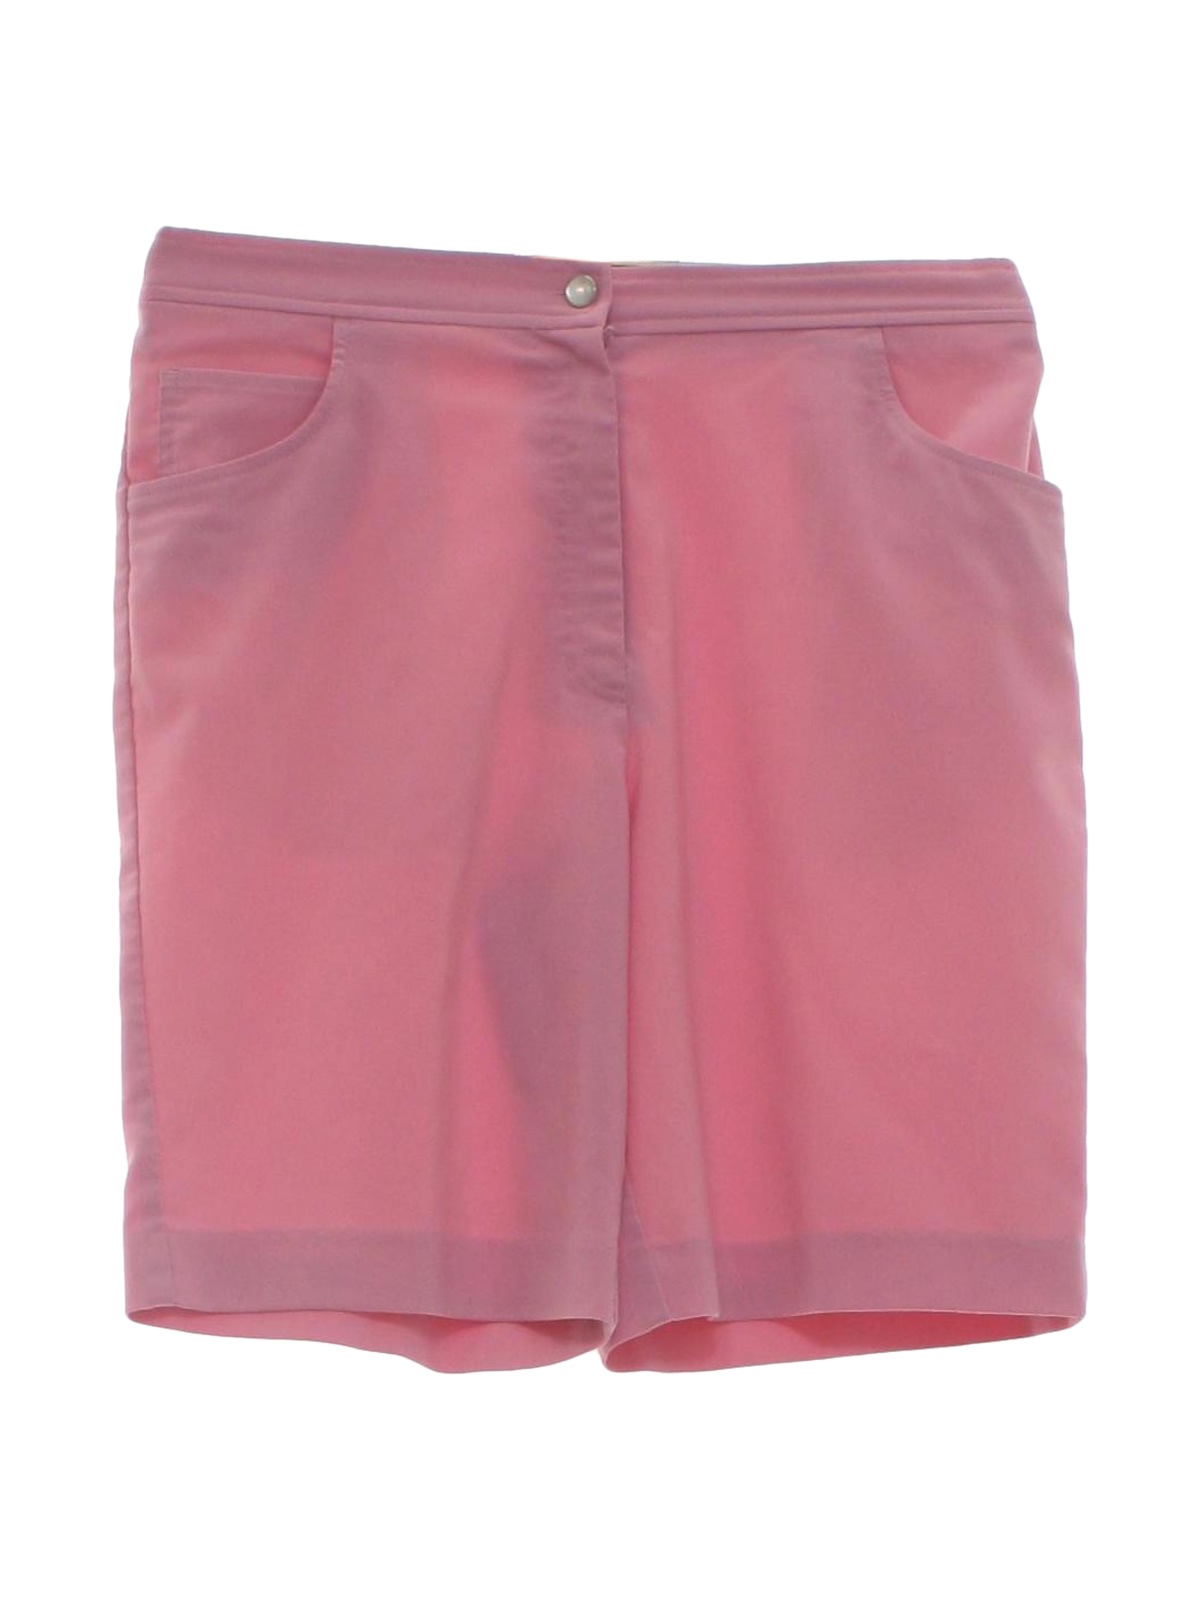 1990s Blair Shorts: 90s -Blair- Womens pink background rayon, polyester ...